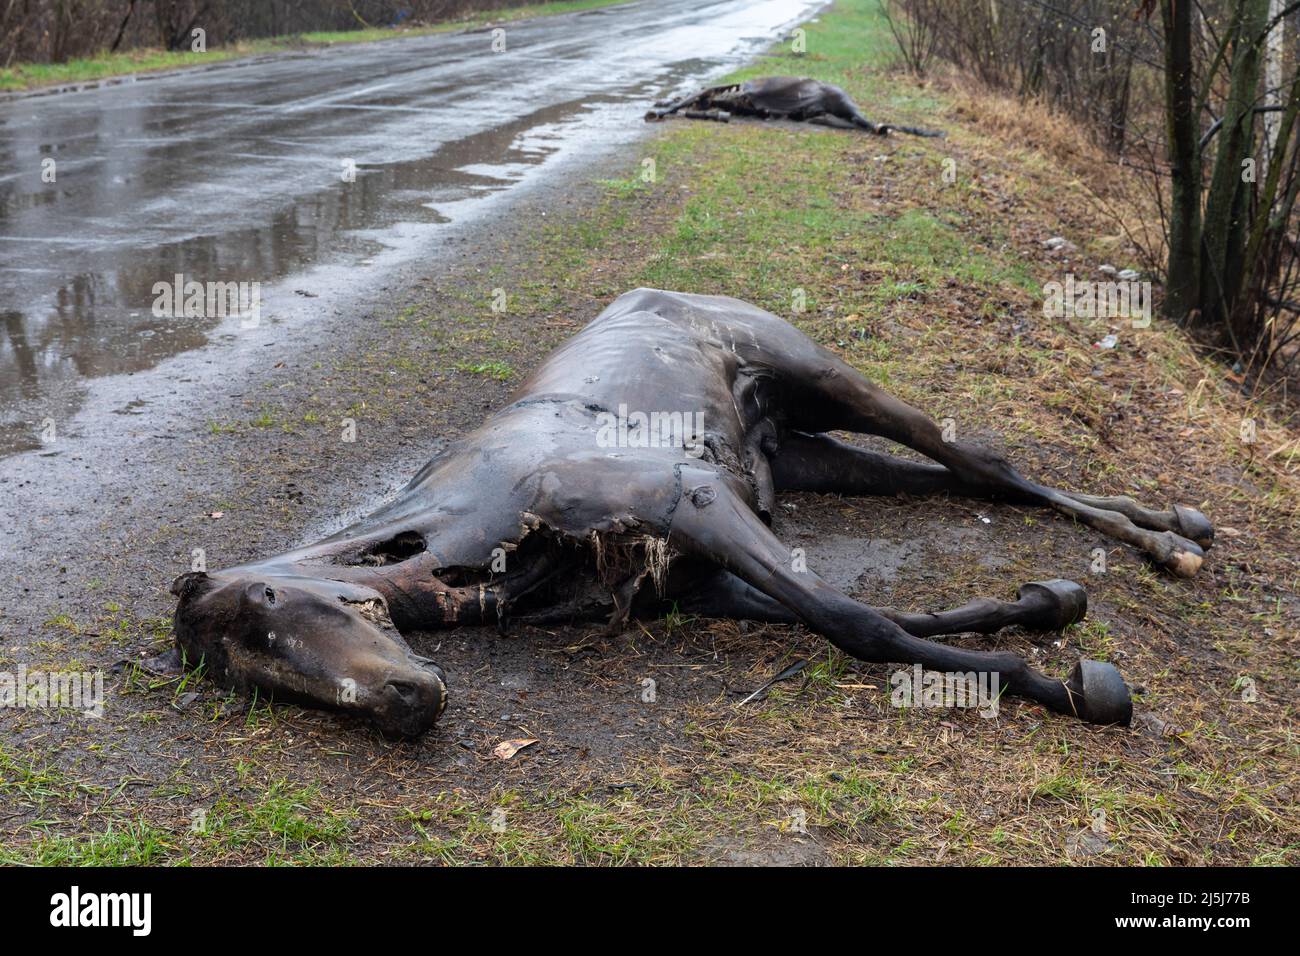 Ukraine. 22nd Apr, 2022. Dead horses killed by Russian invaders lie along the road in the Hostomil region. Russia invaded Ukraine on 24 February 2022, triggering the largest military attack in Europe since World War II. (Photo by Mykhaylo Palinchak/SOPA Images/Sipa USA) Credit: Sipa USA/Alamy Live News Stock Photo